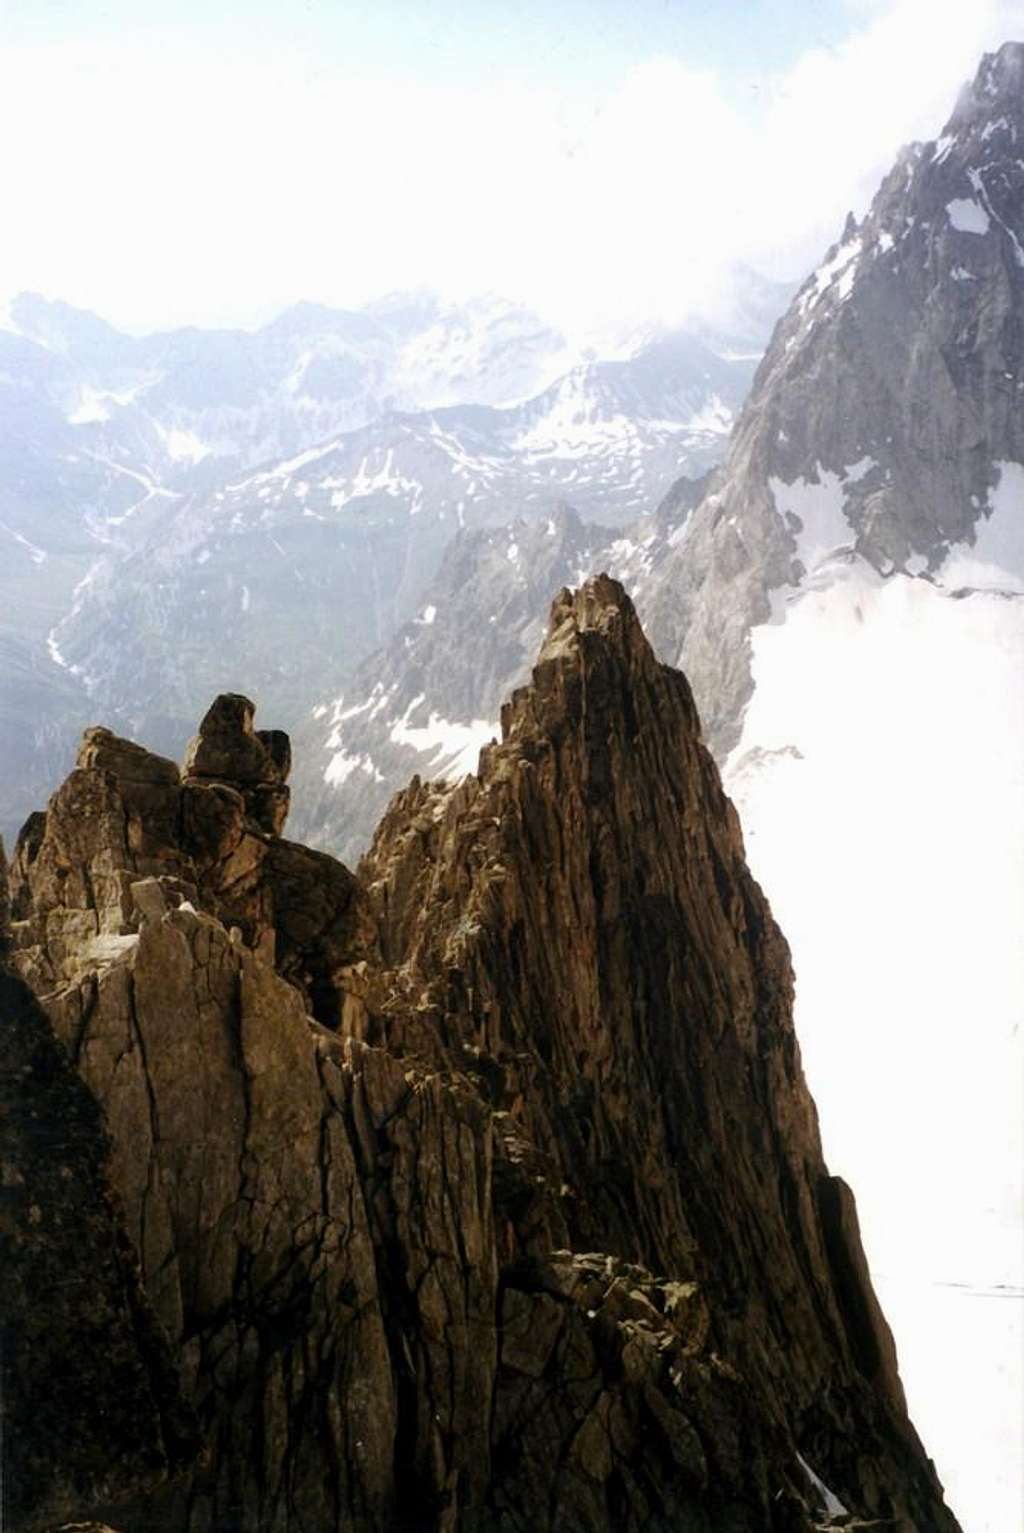  PREUSS ROUTE in the MID of the EDGE